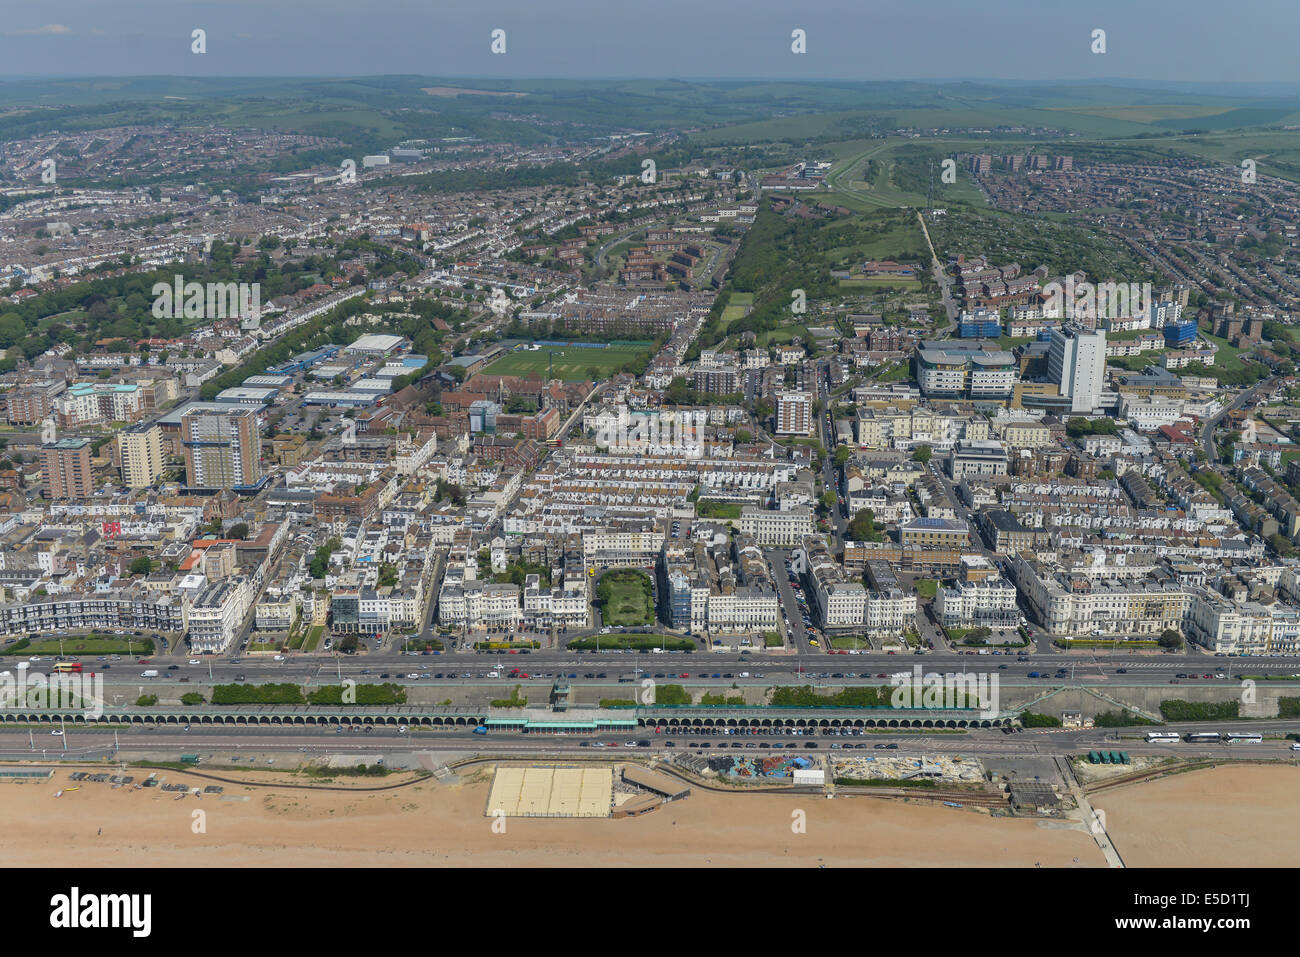 An aerial view looking from the coast to the Kemptown area of Brighton, East Sussex, UK. Stock Photo